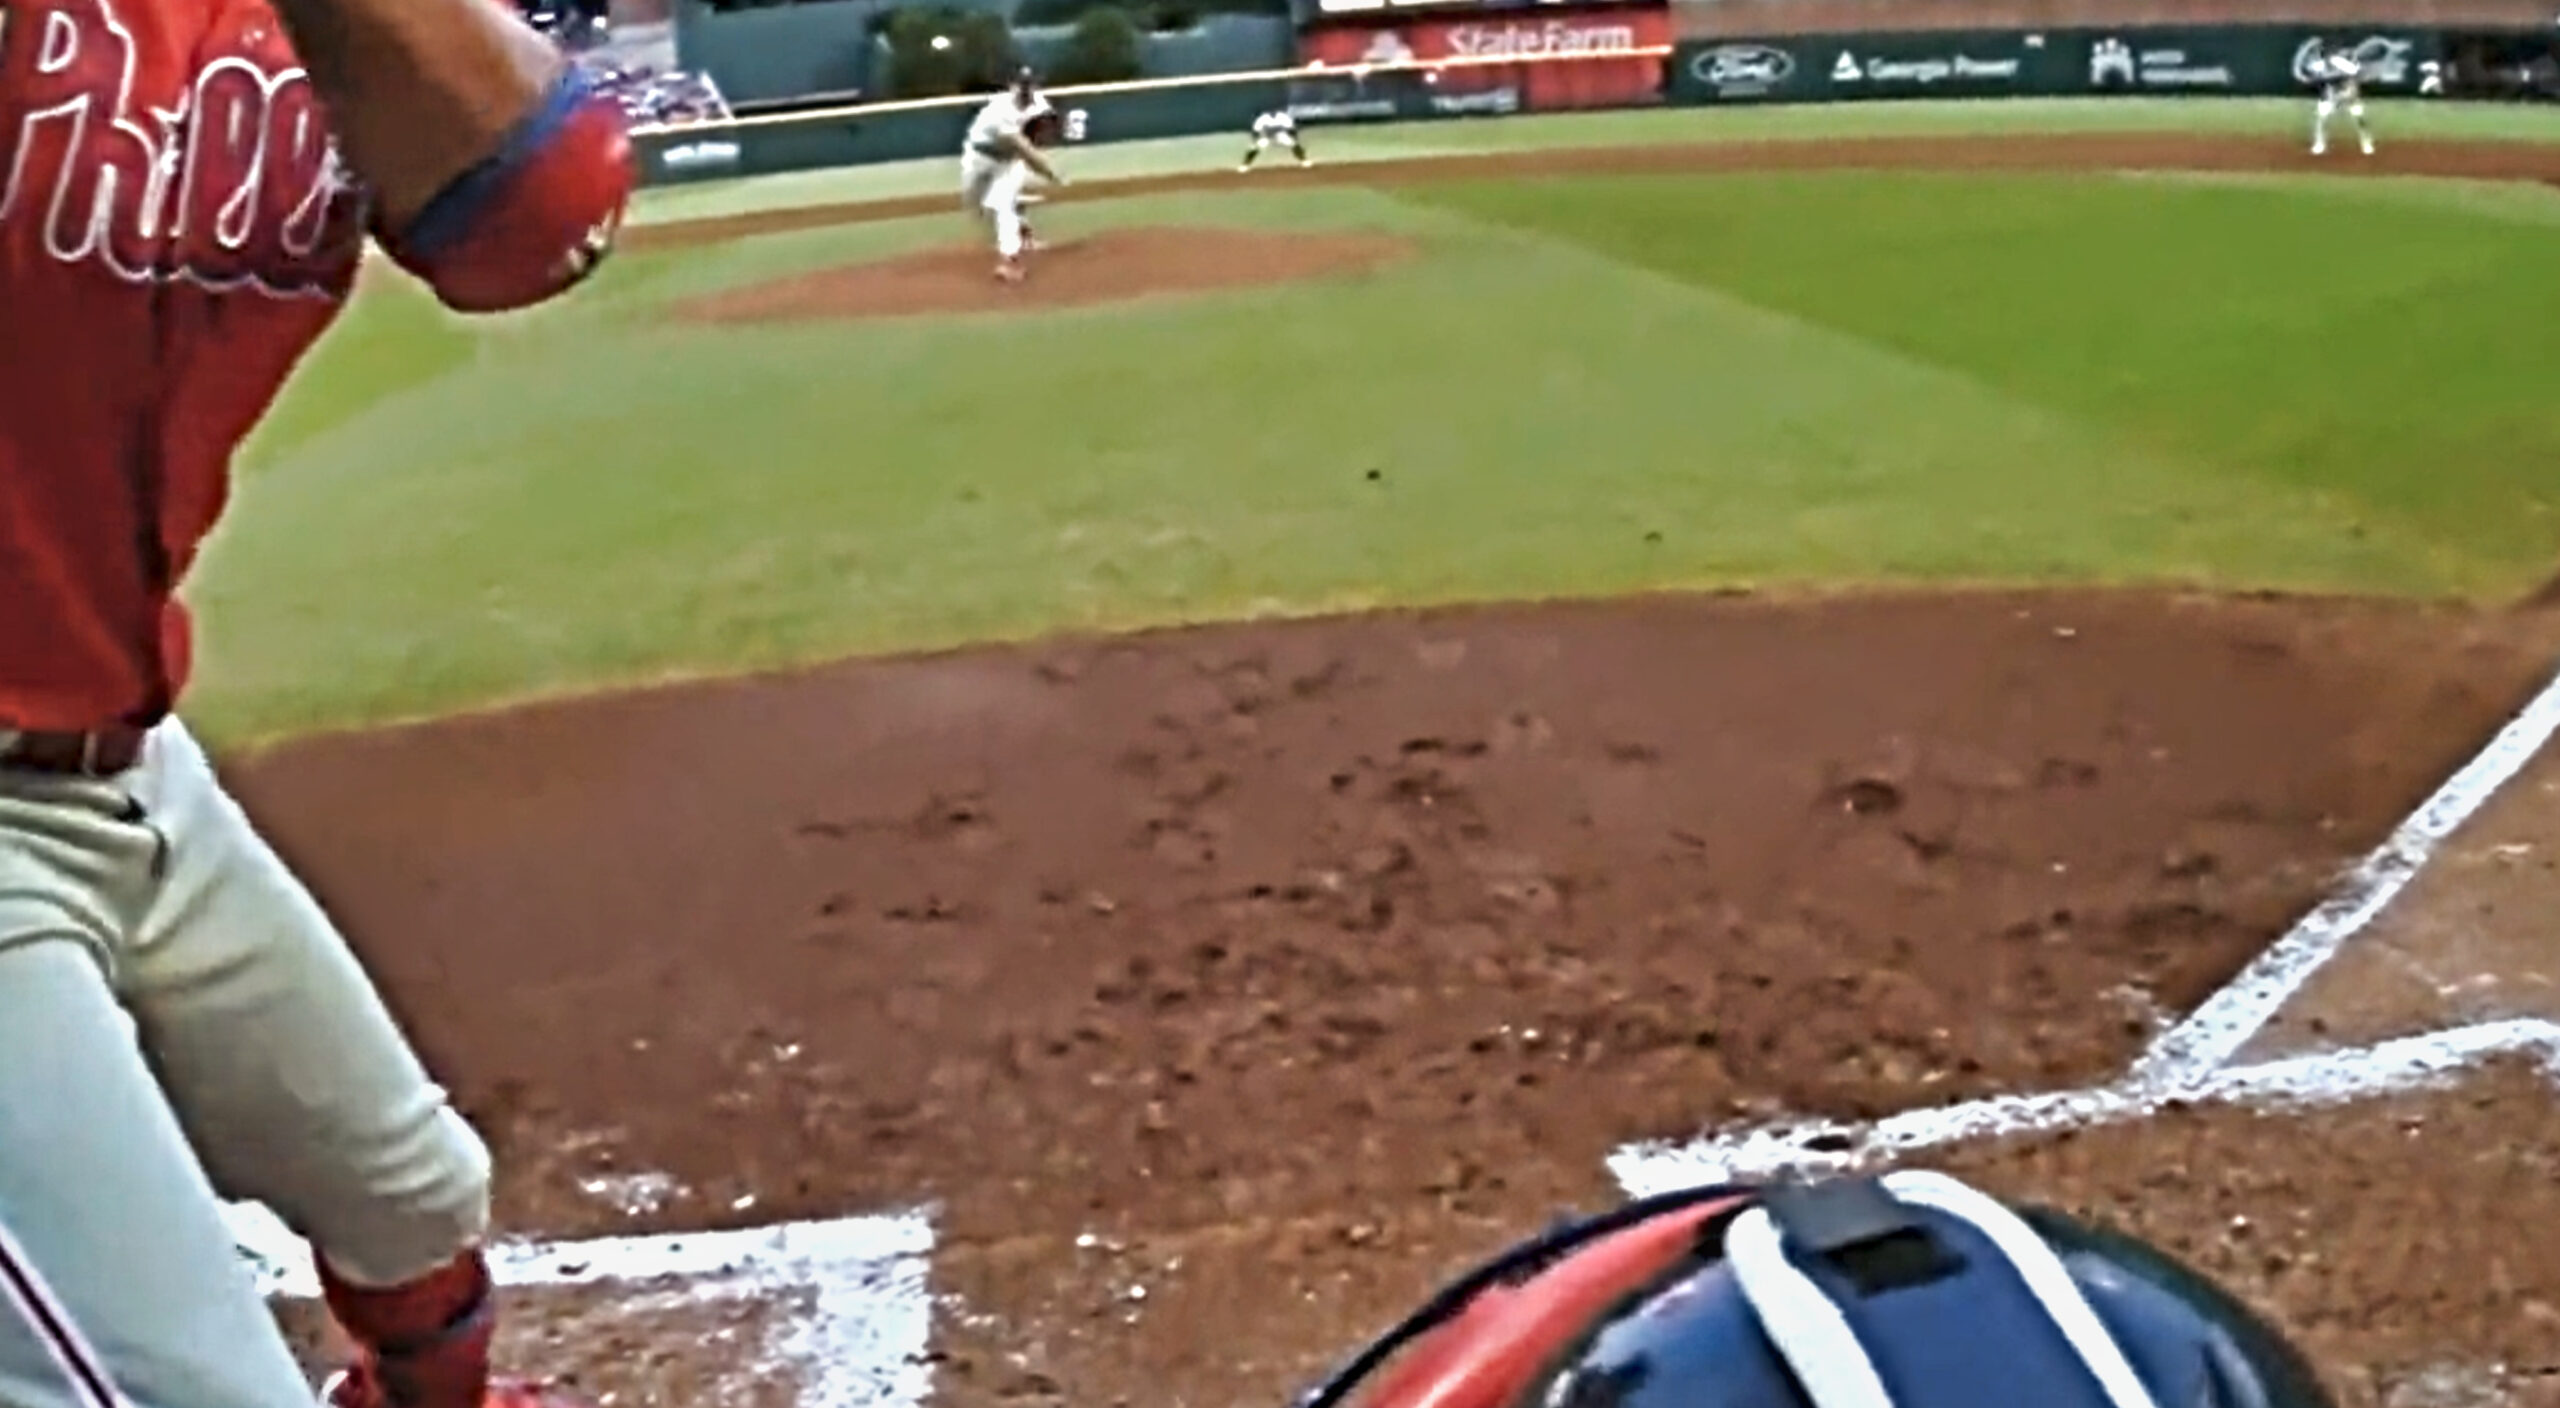 Home plate angle of Spencer Strider's fastball is insane